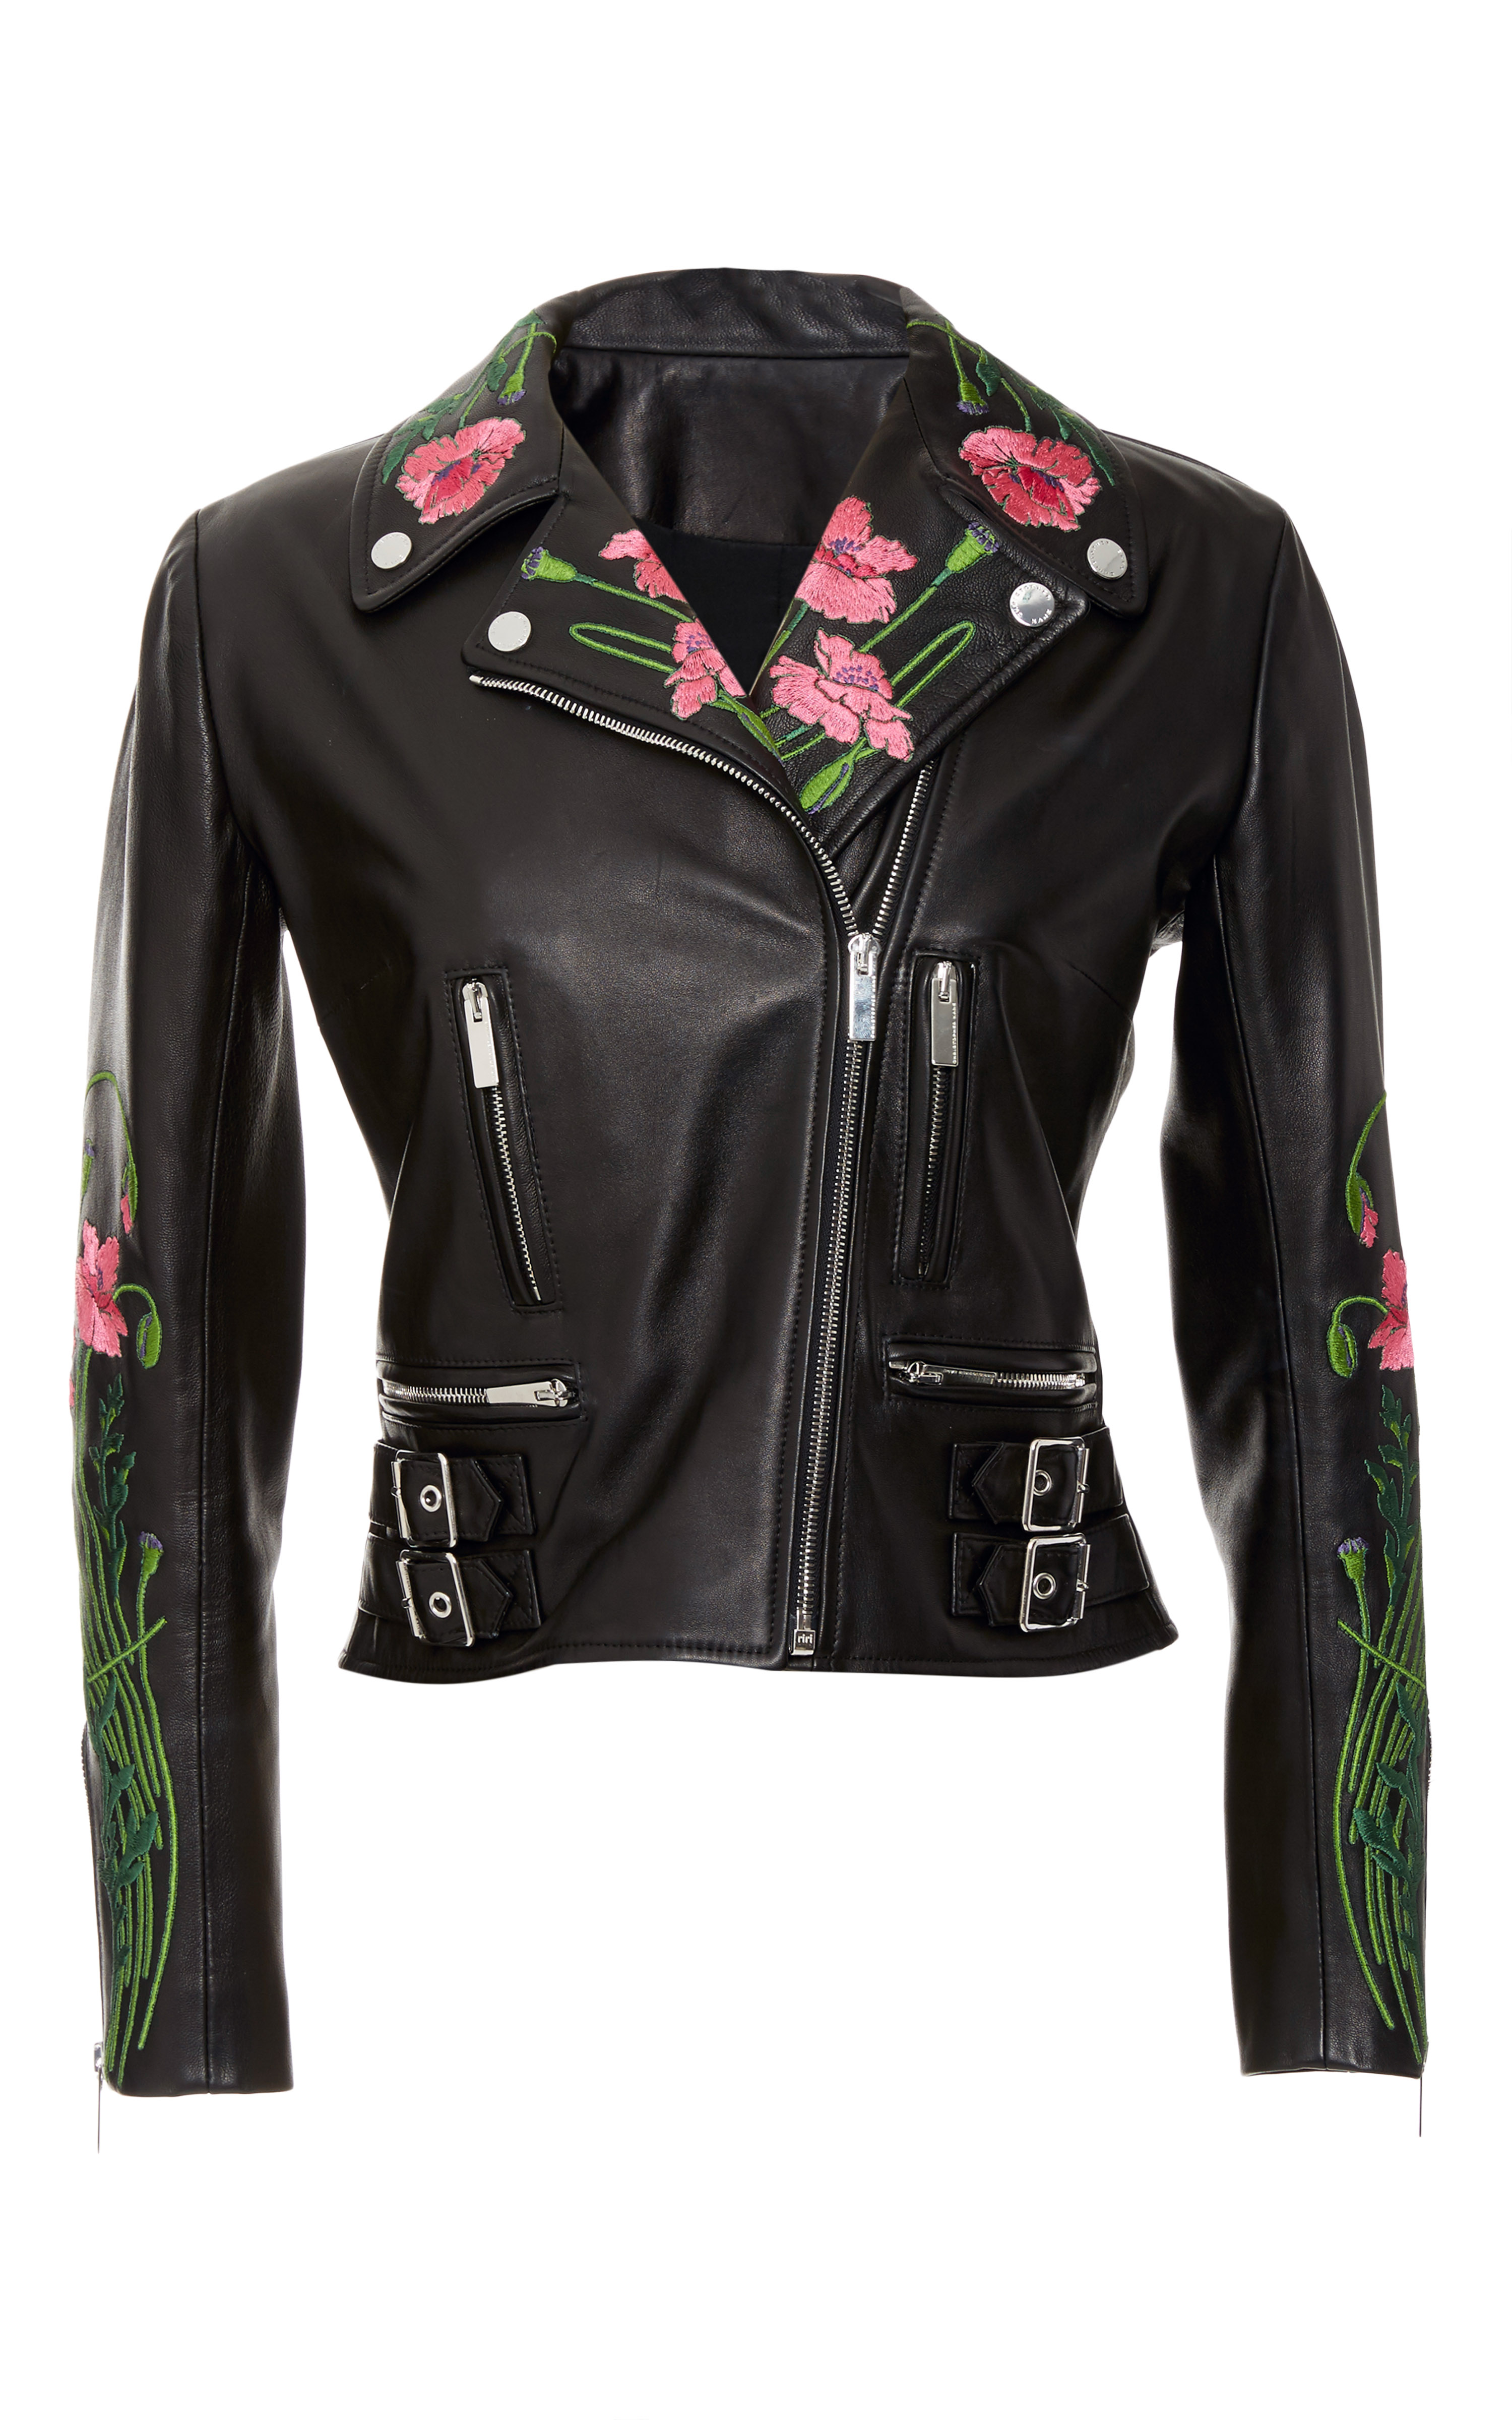 Lyst - Christopher Kane Floral Embroidered Leather Jacket in Black